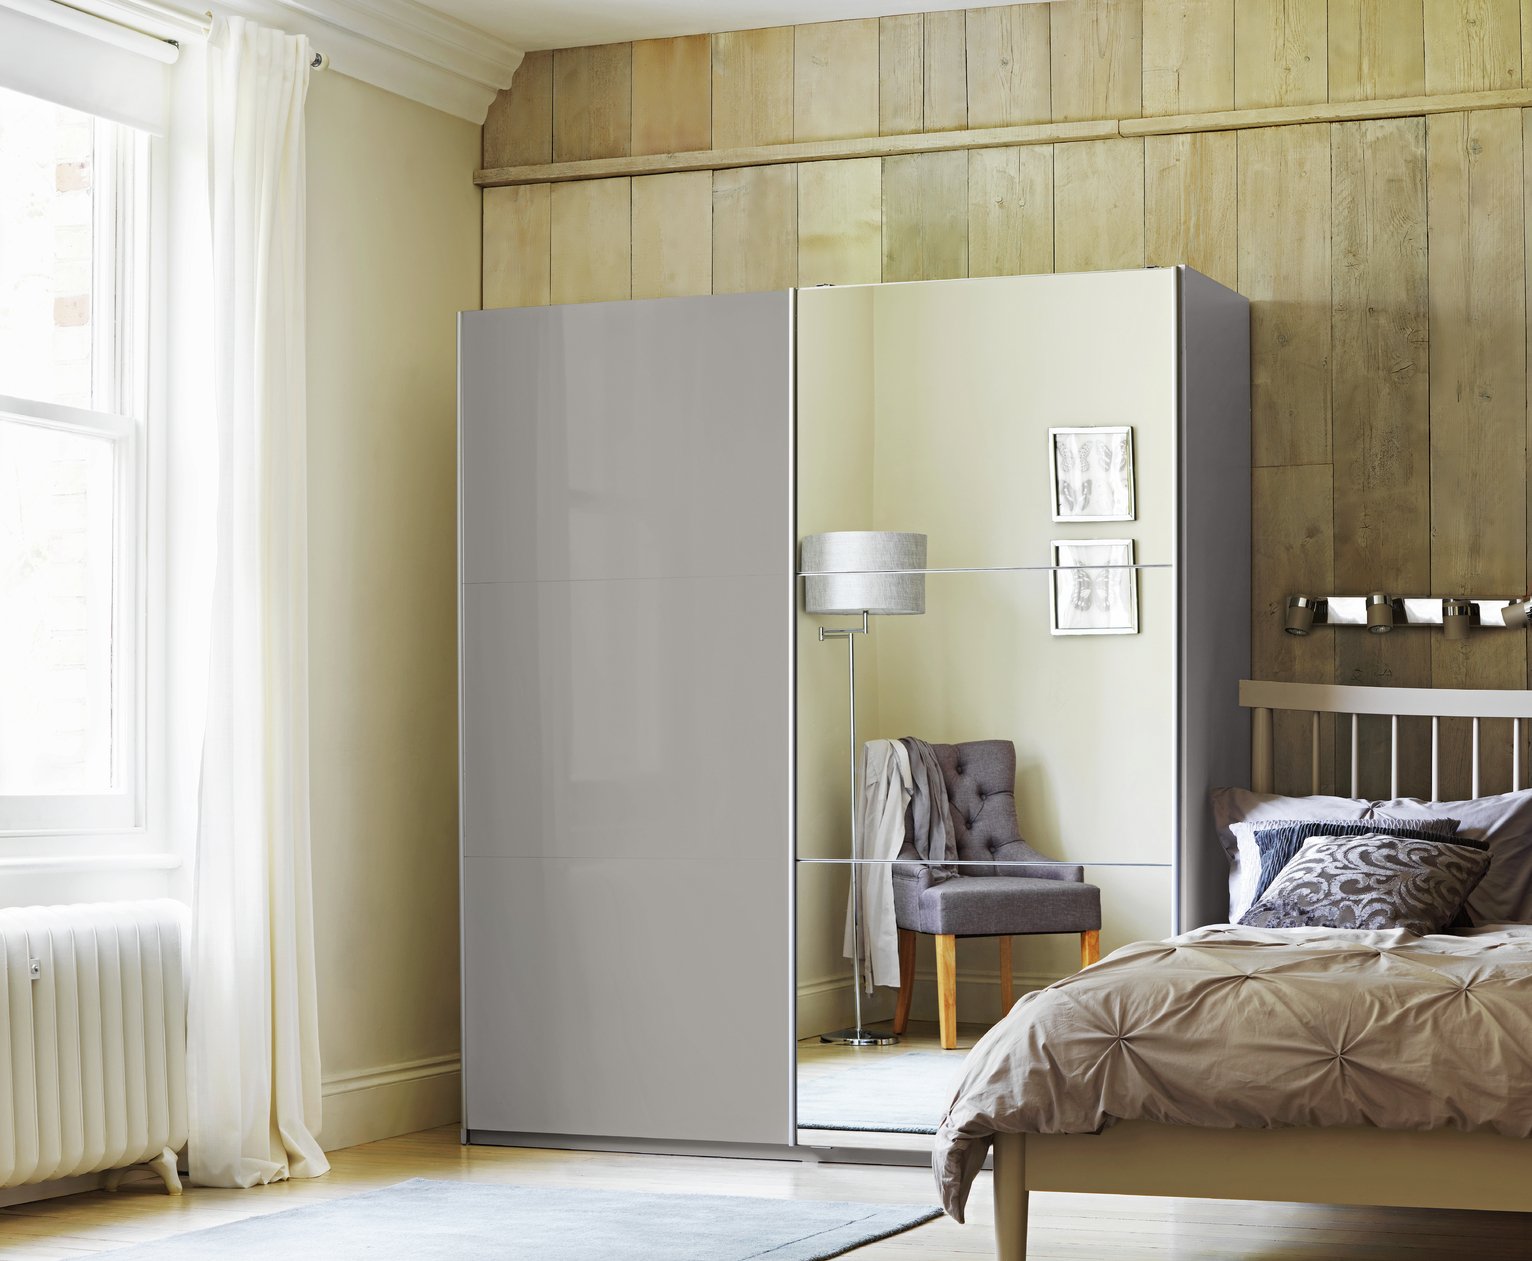 Argos Home Holsted Large Grey Gloss &Mirror Sliding Wardrobe Review